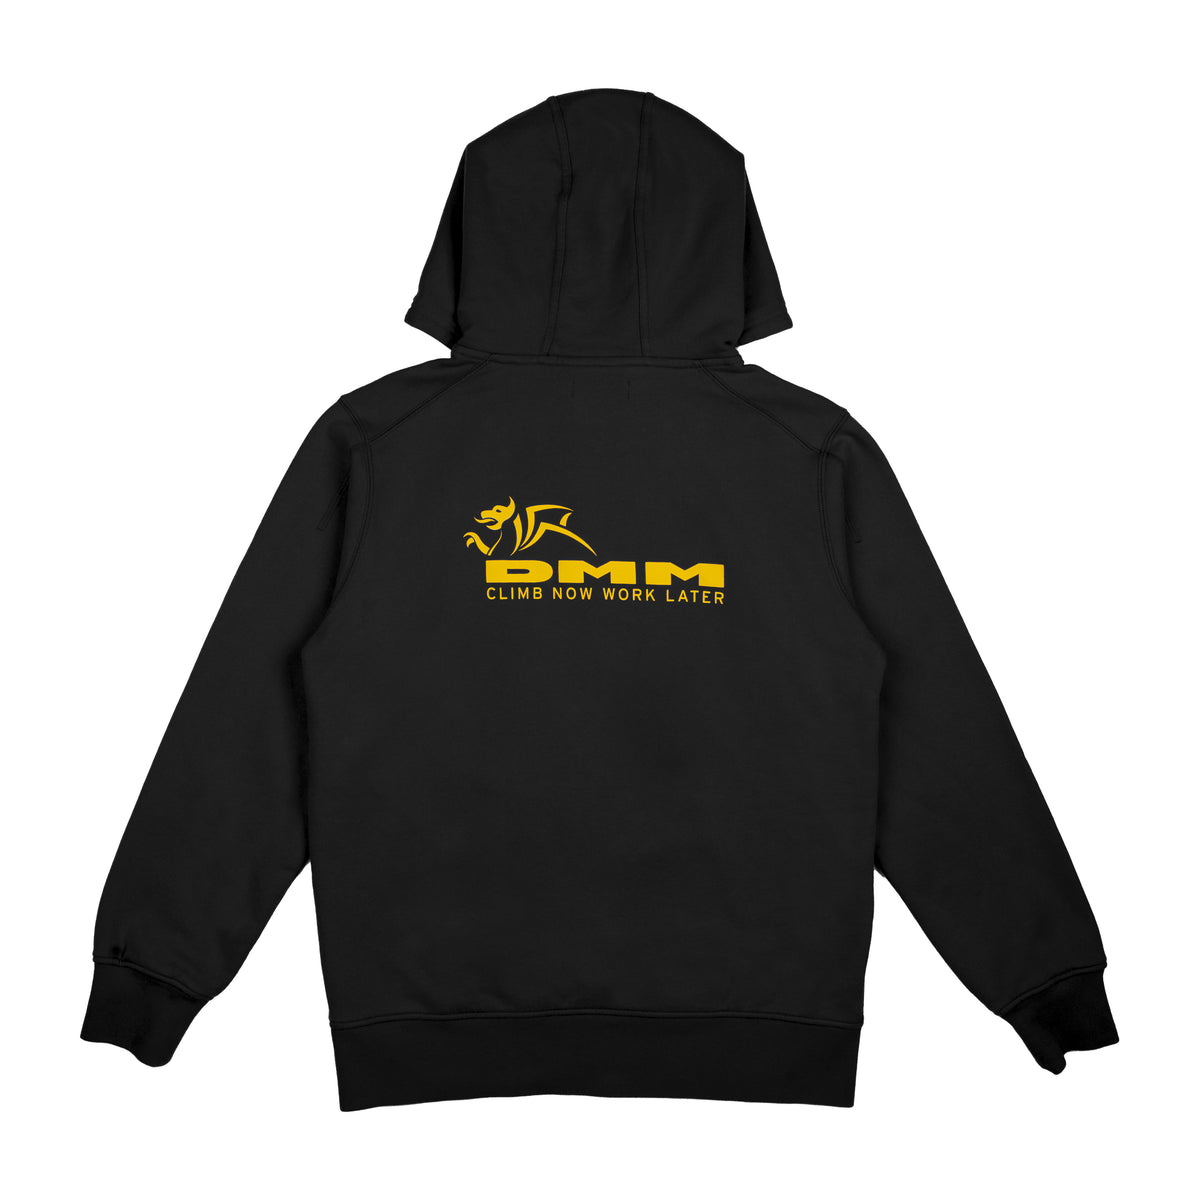 DMM Climb Now Work Later Hoodie Forged Iron logo